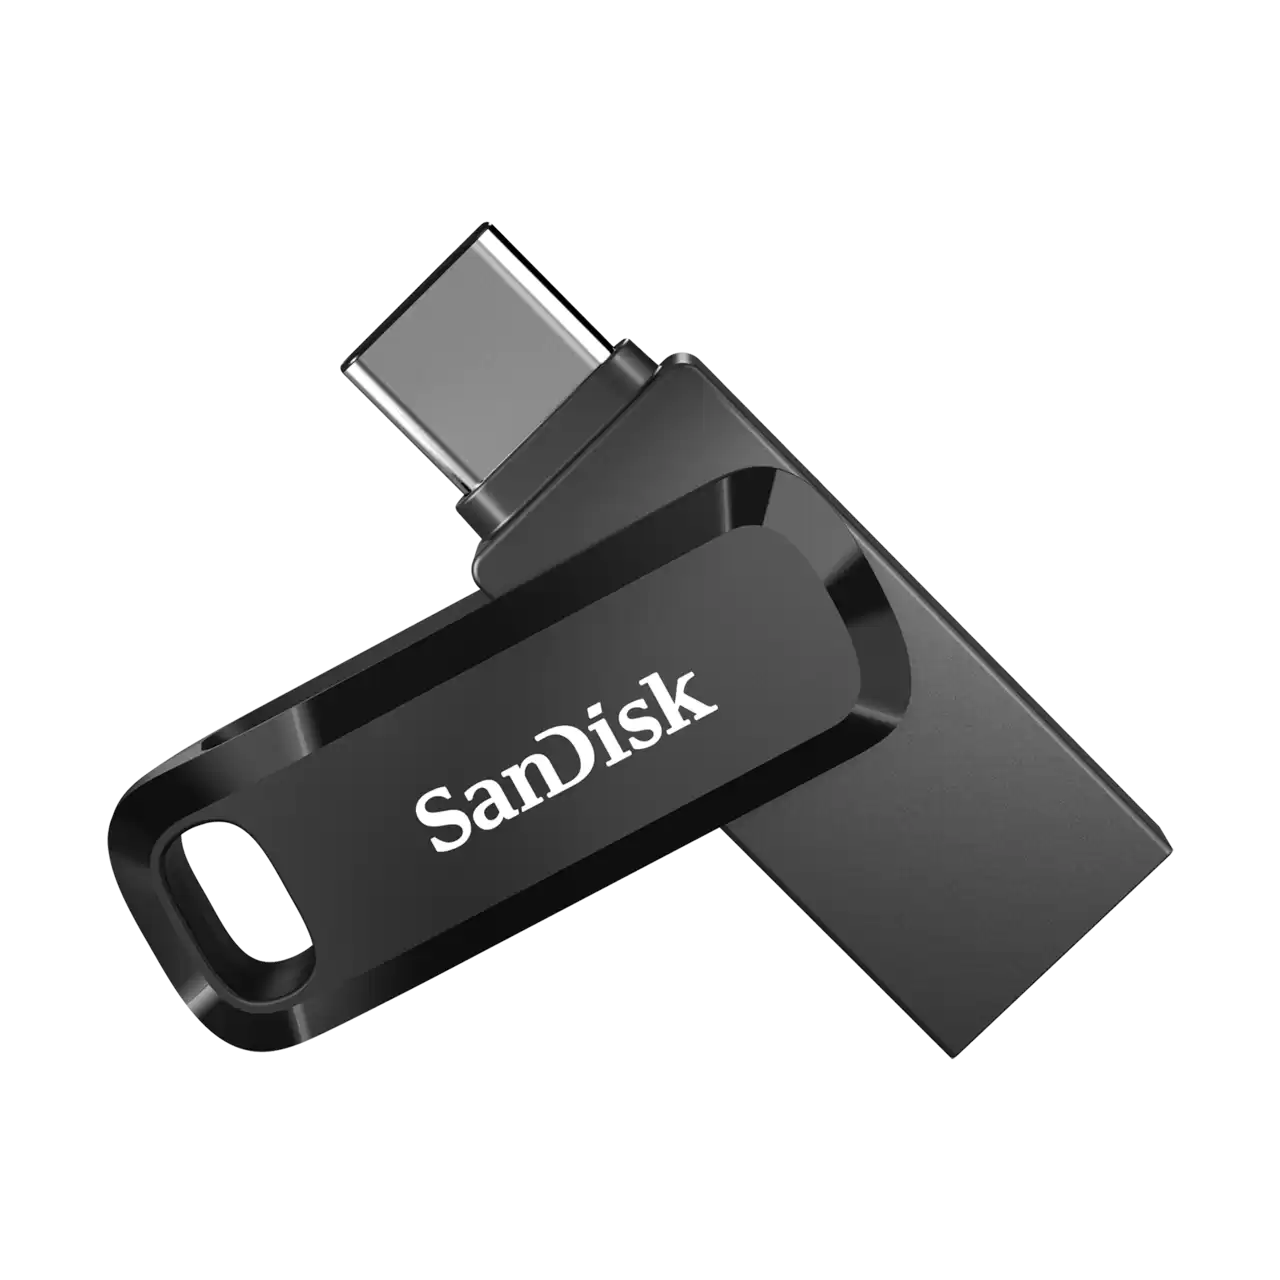 What Is a Flash Drive?